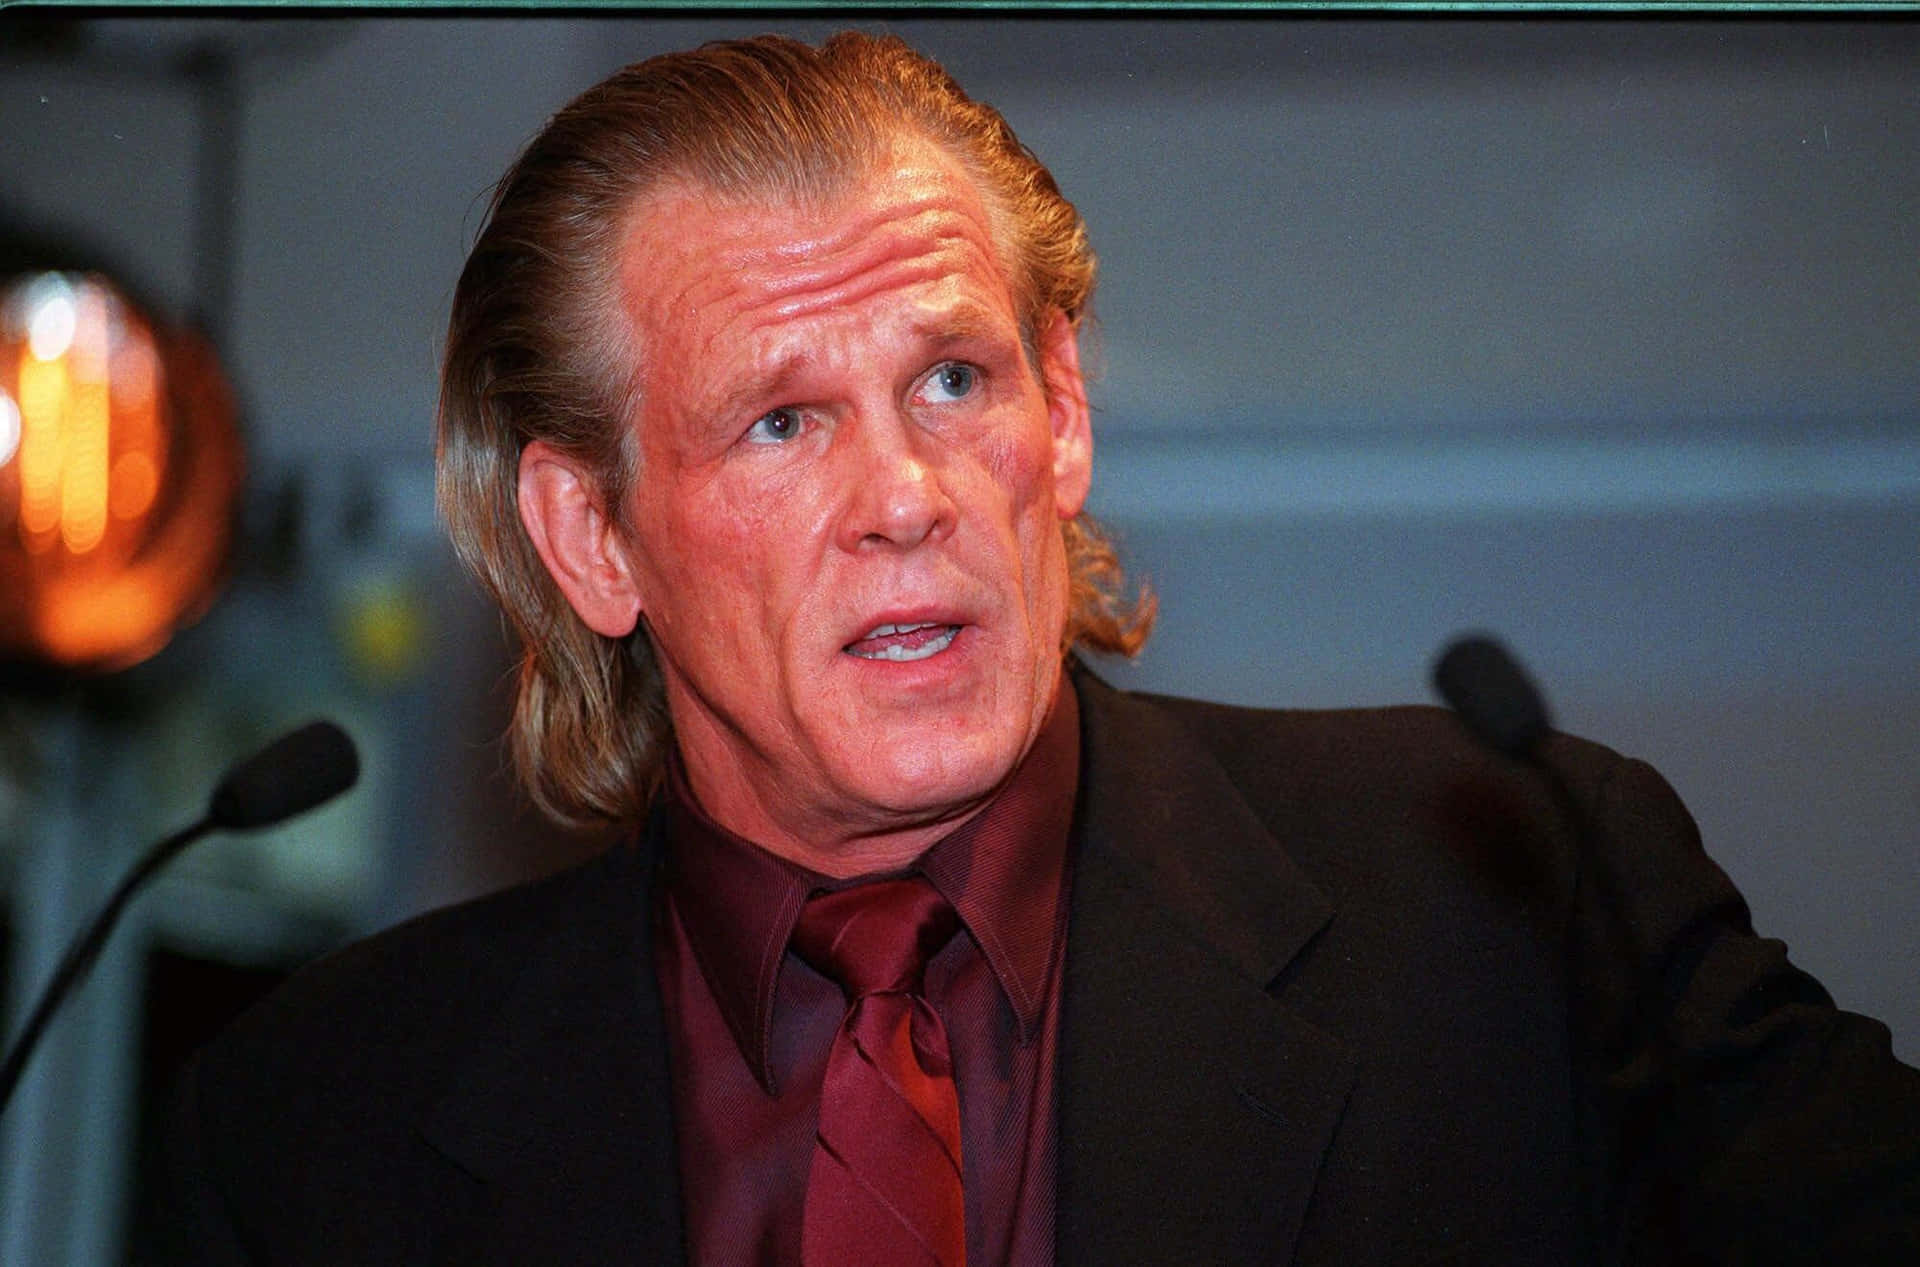 Actor Nick Nolte at the 2004 Cannes Film Festival Wallpaper